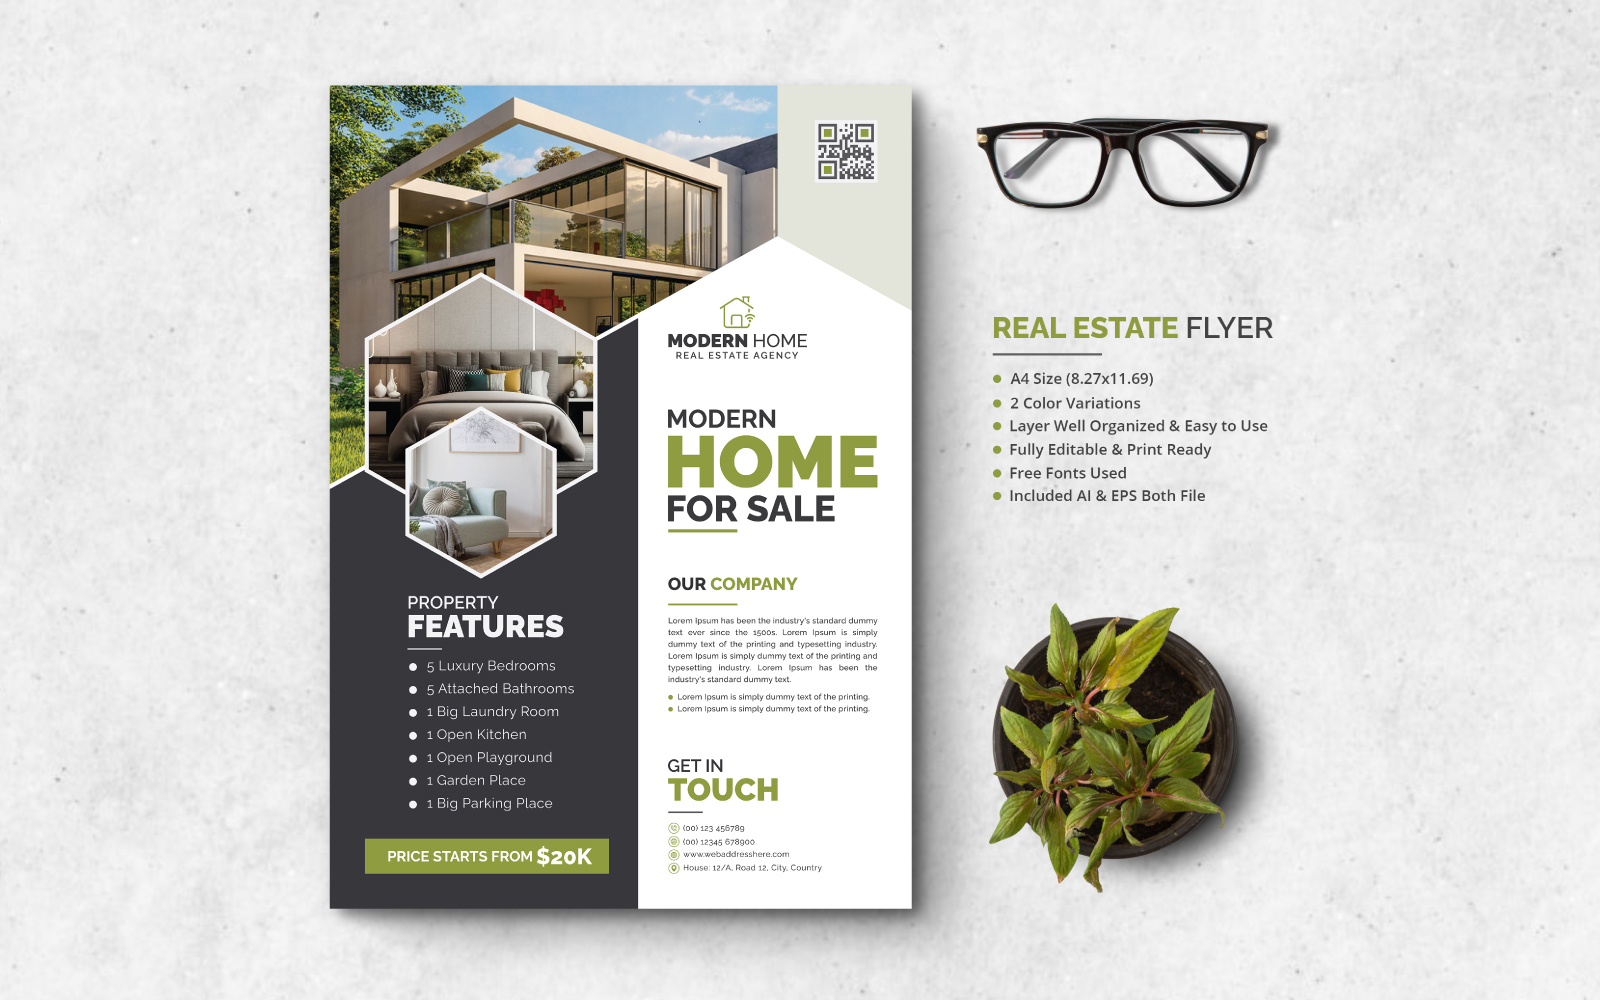 Creative Real Estate Flyer, Professional Real Estate Flyer, Modern Real Estate Flyer